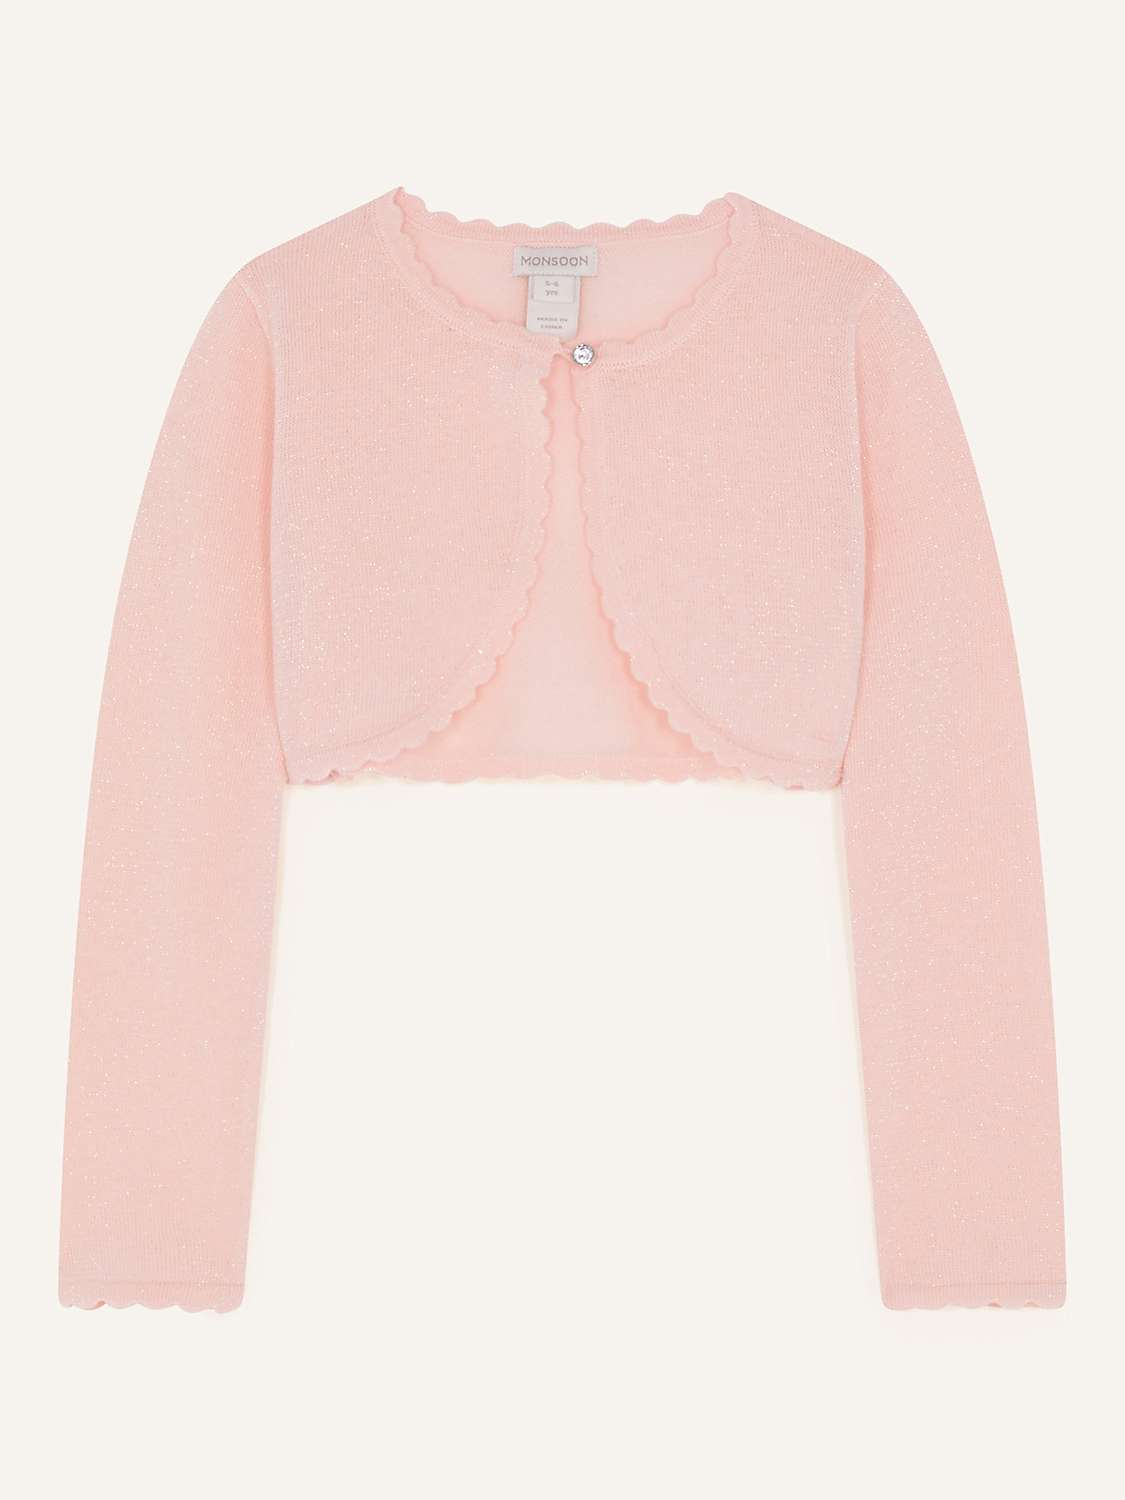 Buy Monsoon Kids' Niamh Cropped Scallop Edge Cardigan Online at johnlewis.com